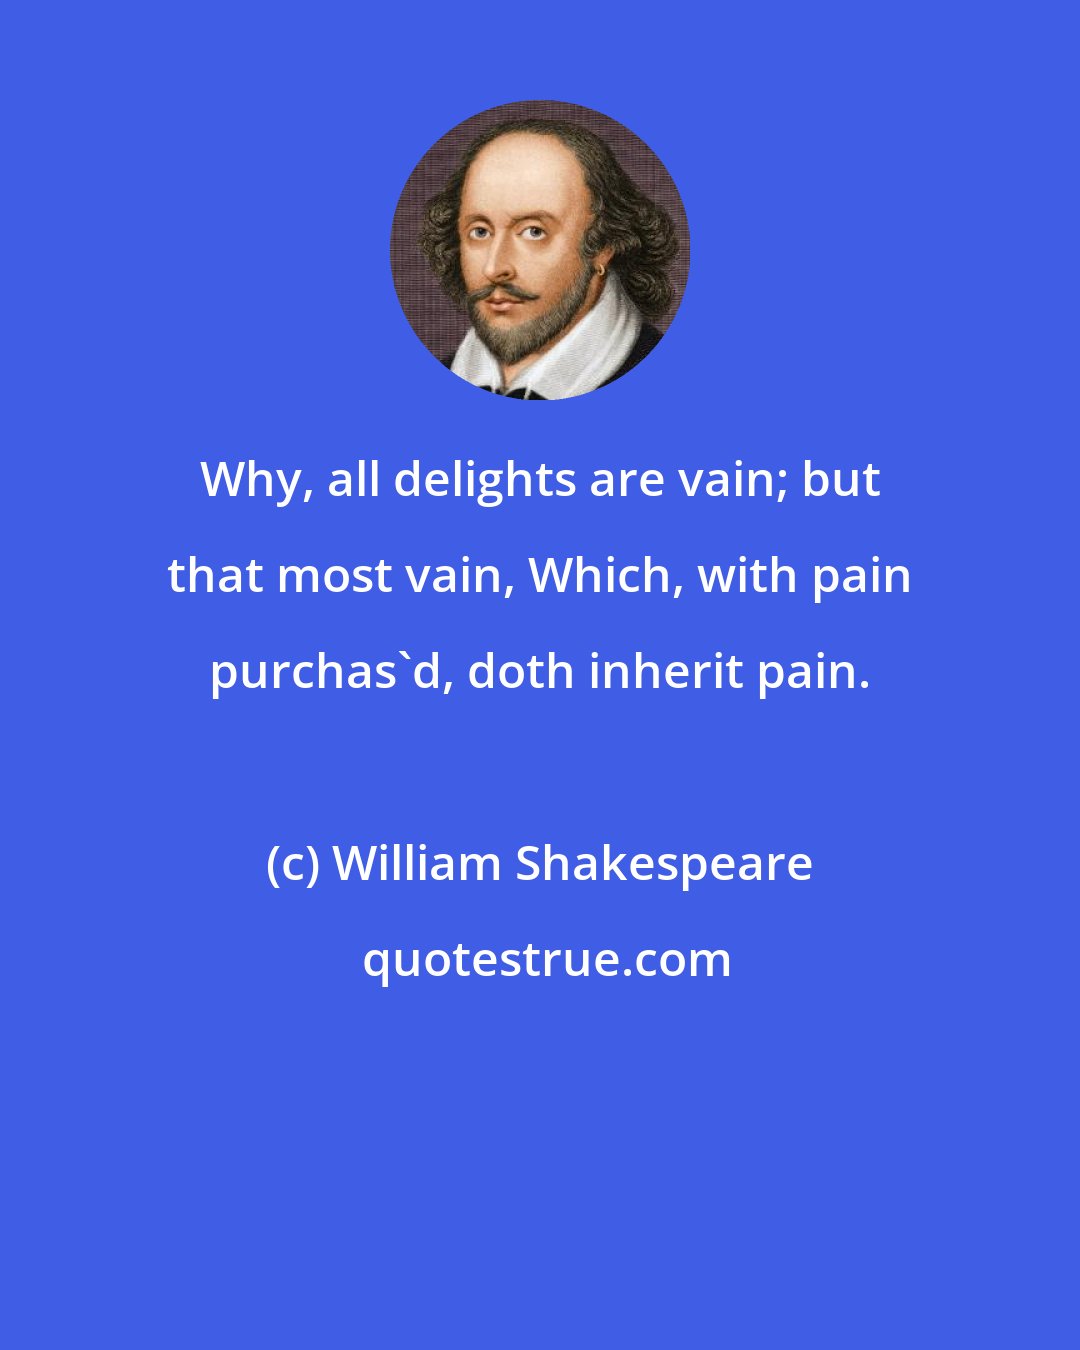 William Shakespeare: Why, all delights are vain; but that most vain, Which, with pain purchas'd, doth inherit pain.